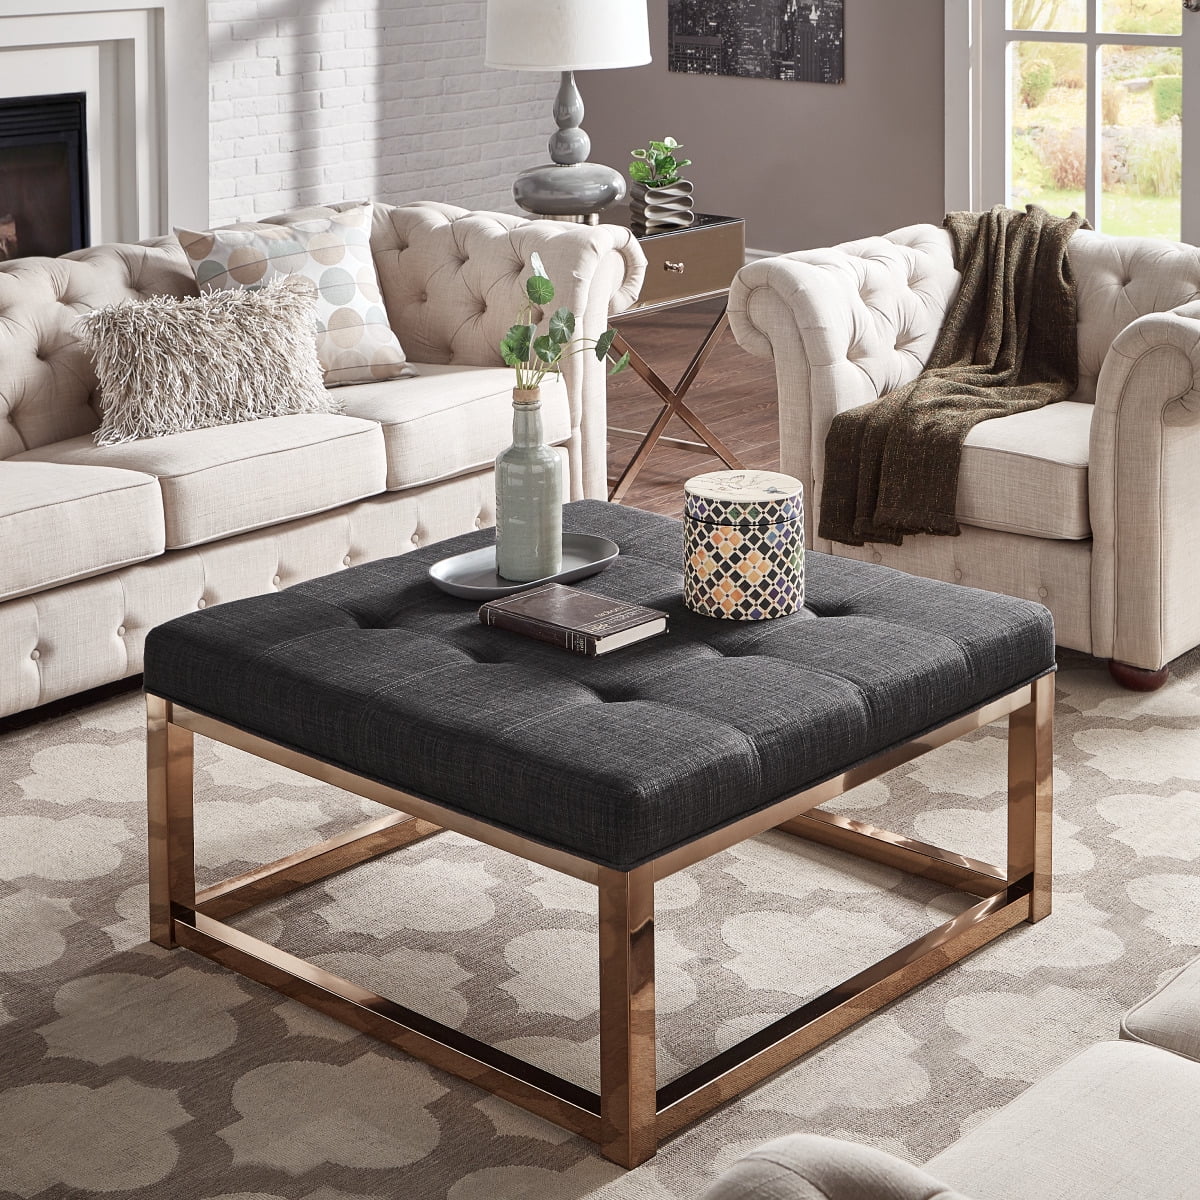 Weston Home Libby Dimpled Tufted Cushion Ottoman Coffee ...